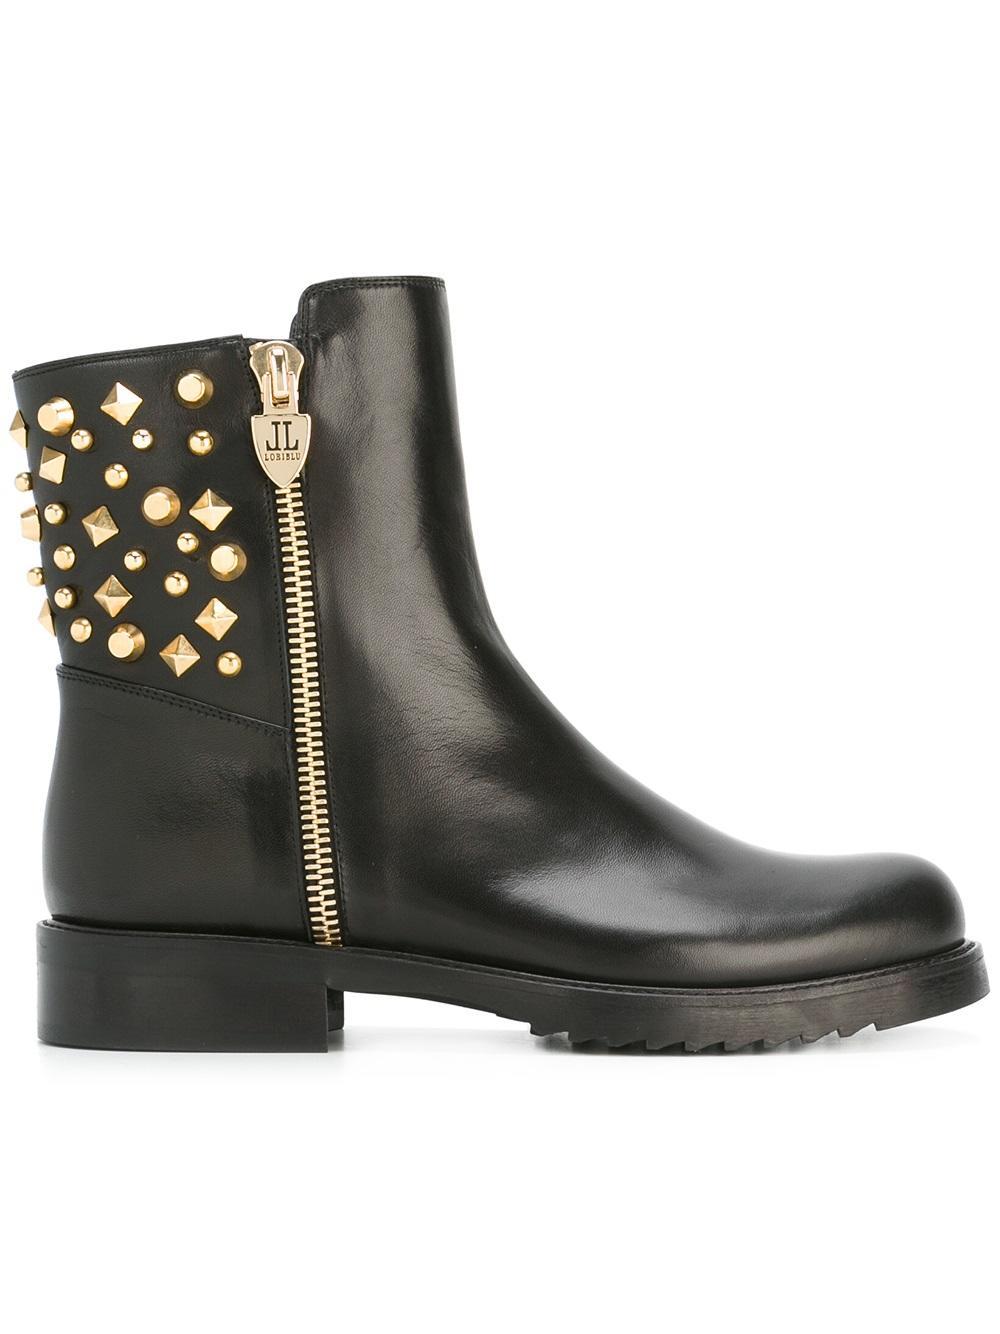 Loriblu Embellished Leather Ankle Boots in Black - Lyst